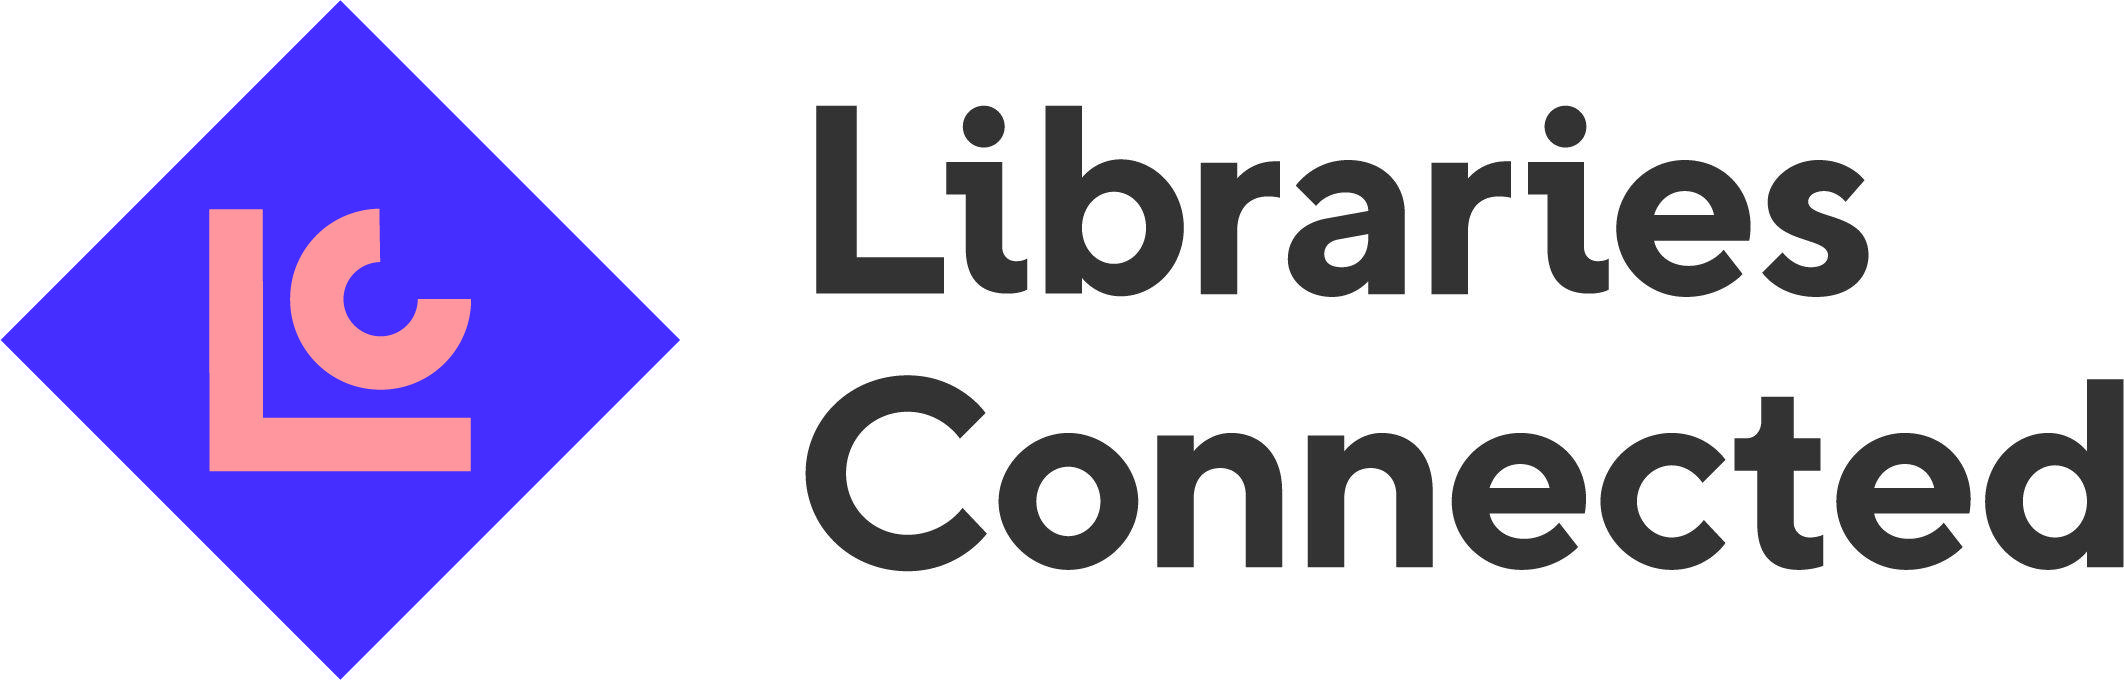 Purple Org Logo - Libraries Connected linear purple logo